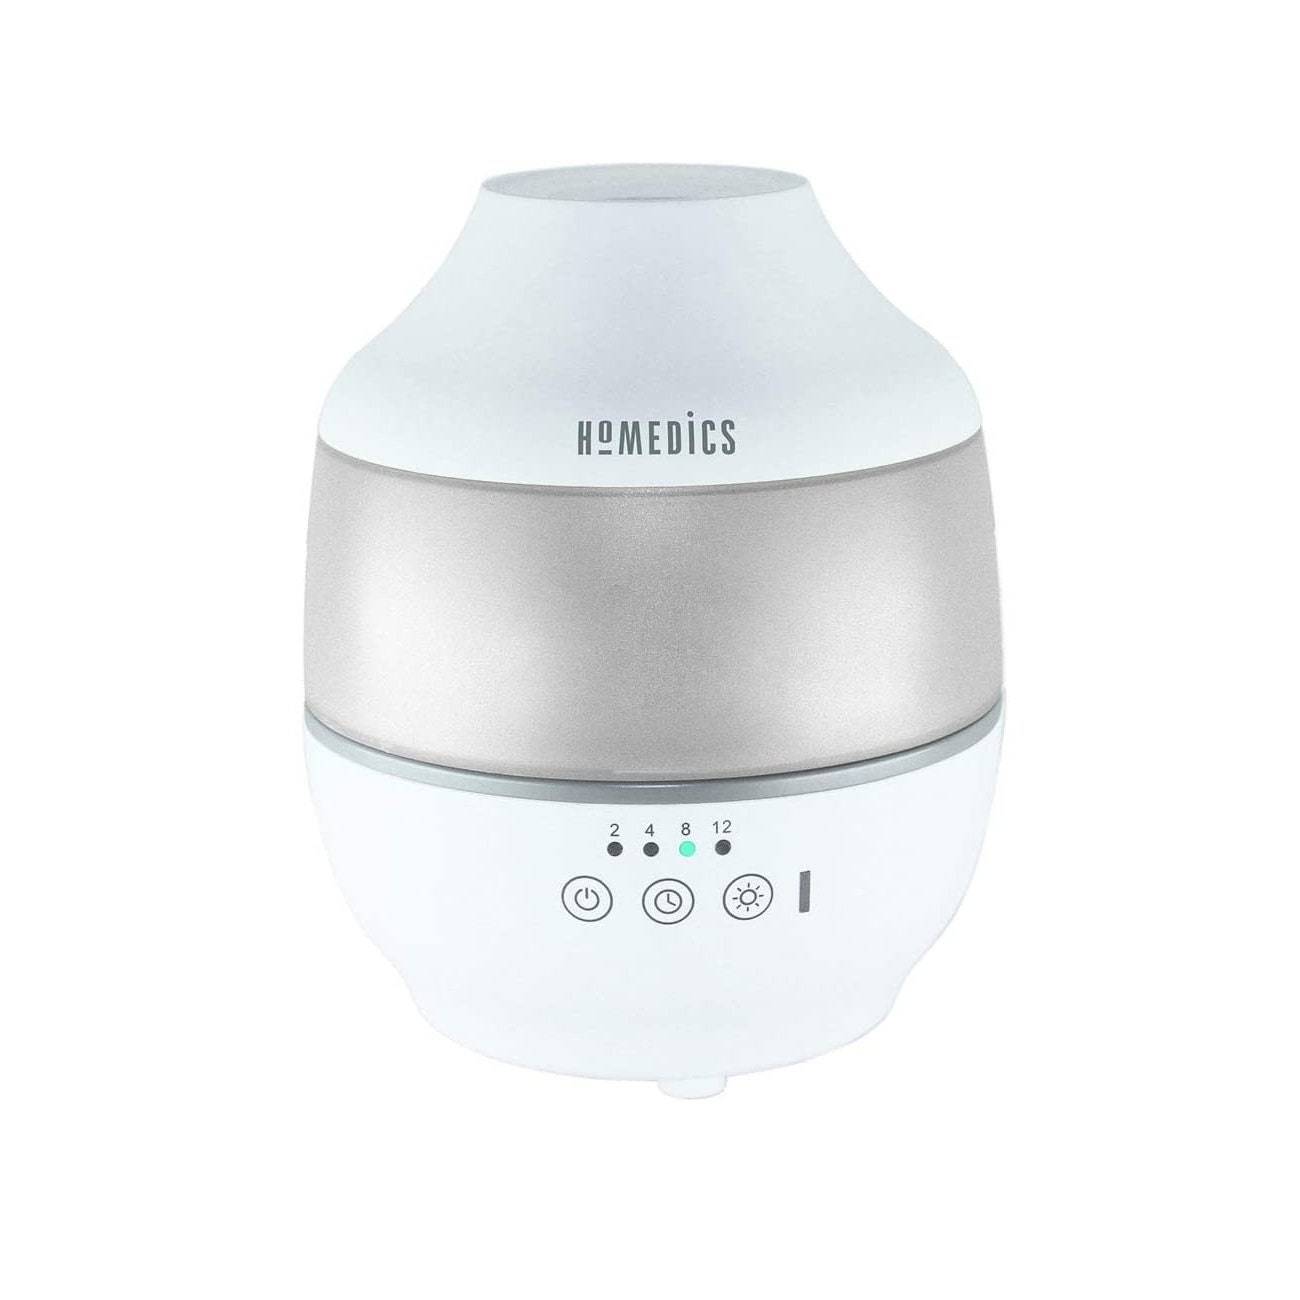 HoMedics Total Comfort Humidifier with 7 Night Light Colors - $112.48